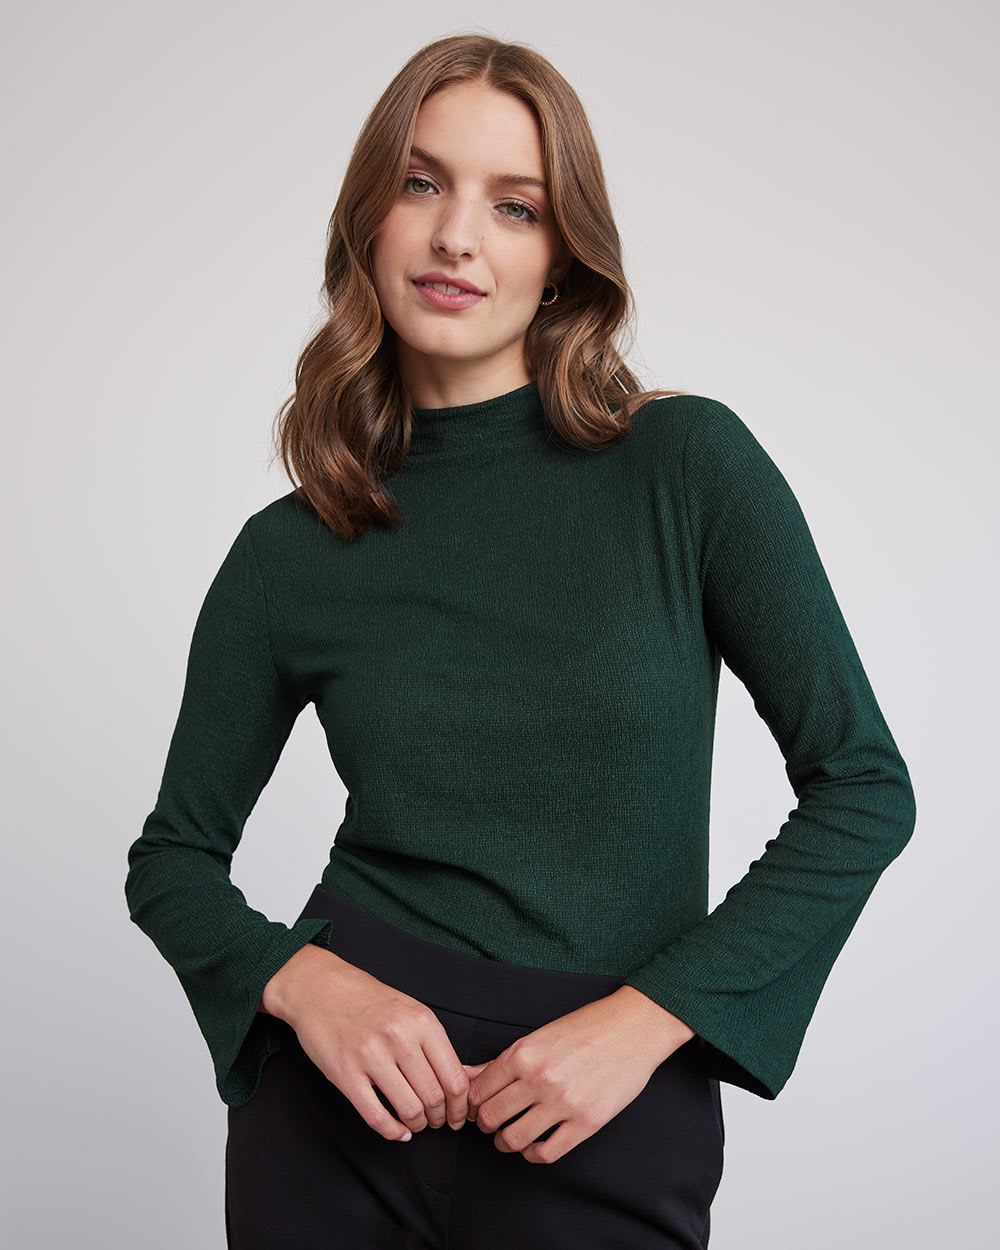 Long-Sleeve Crinkle Top with Funnel Neckline | RW&CO.